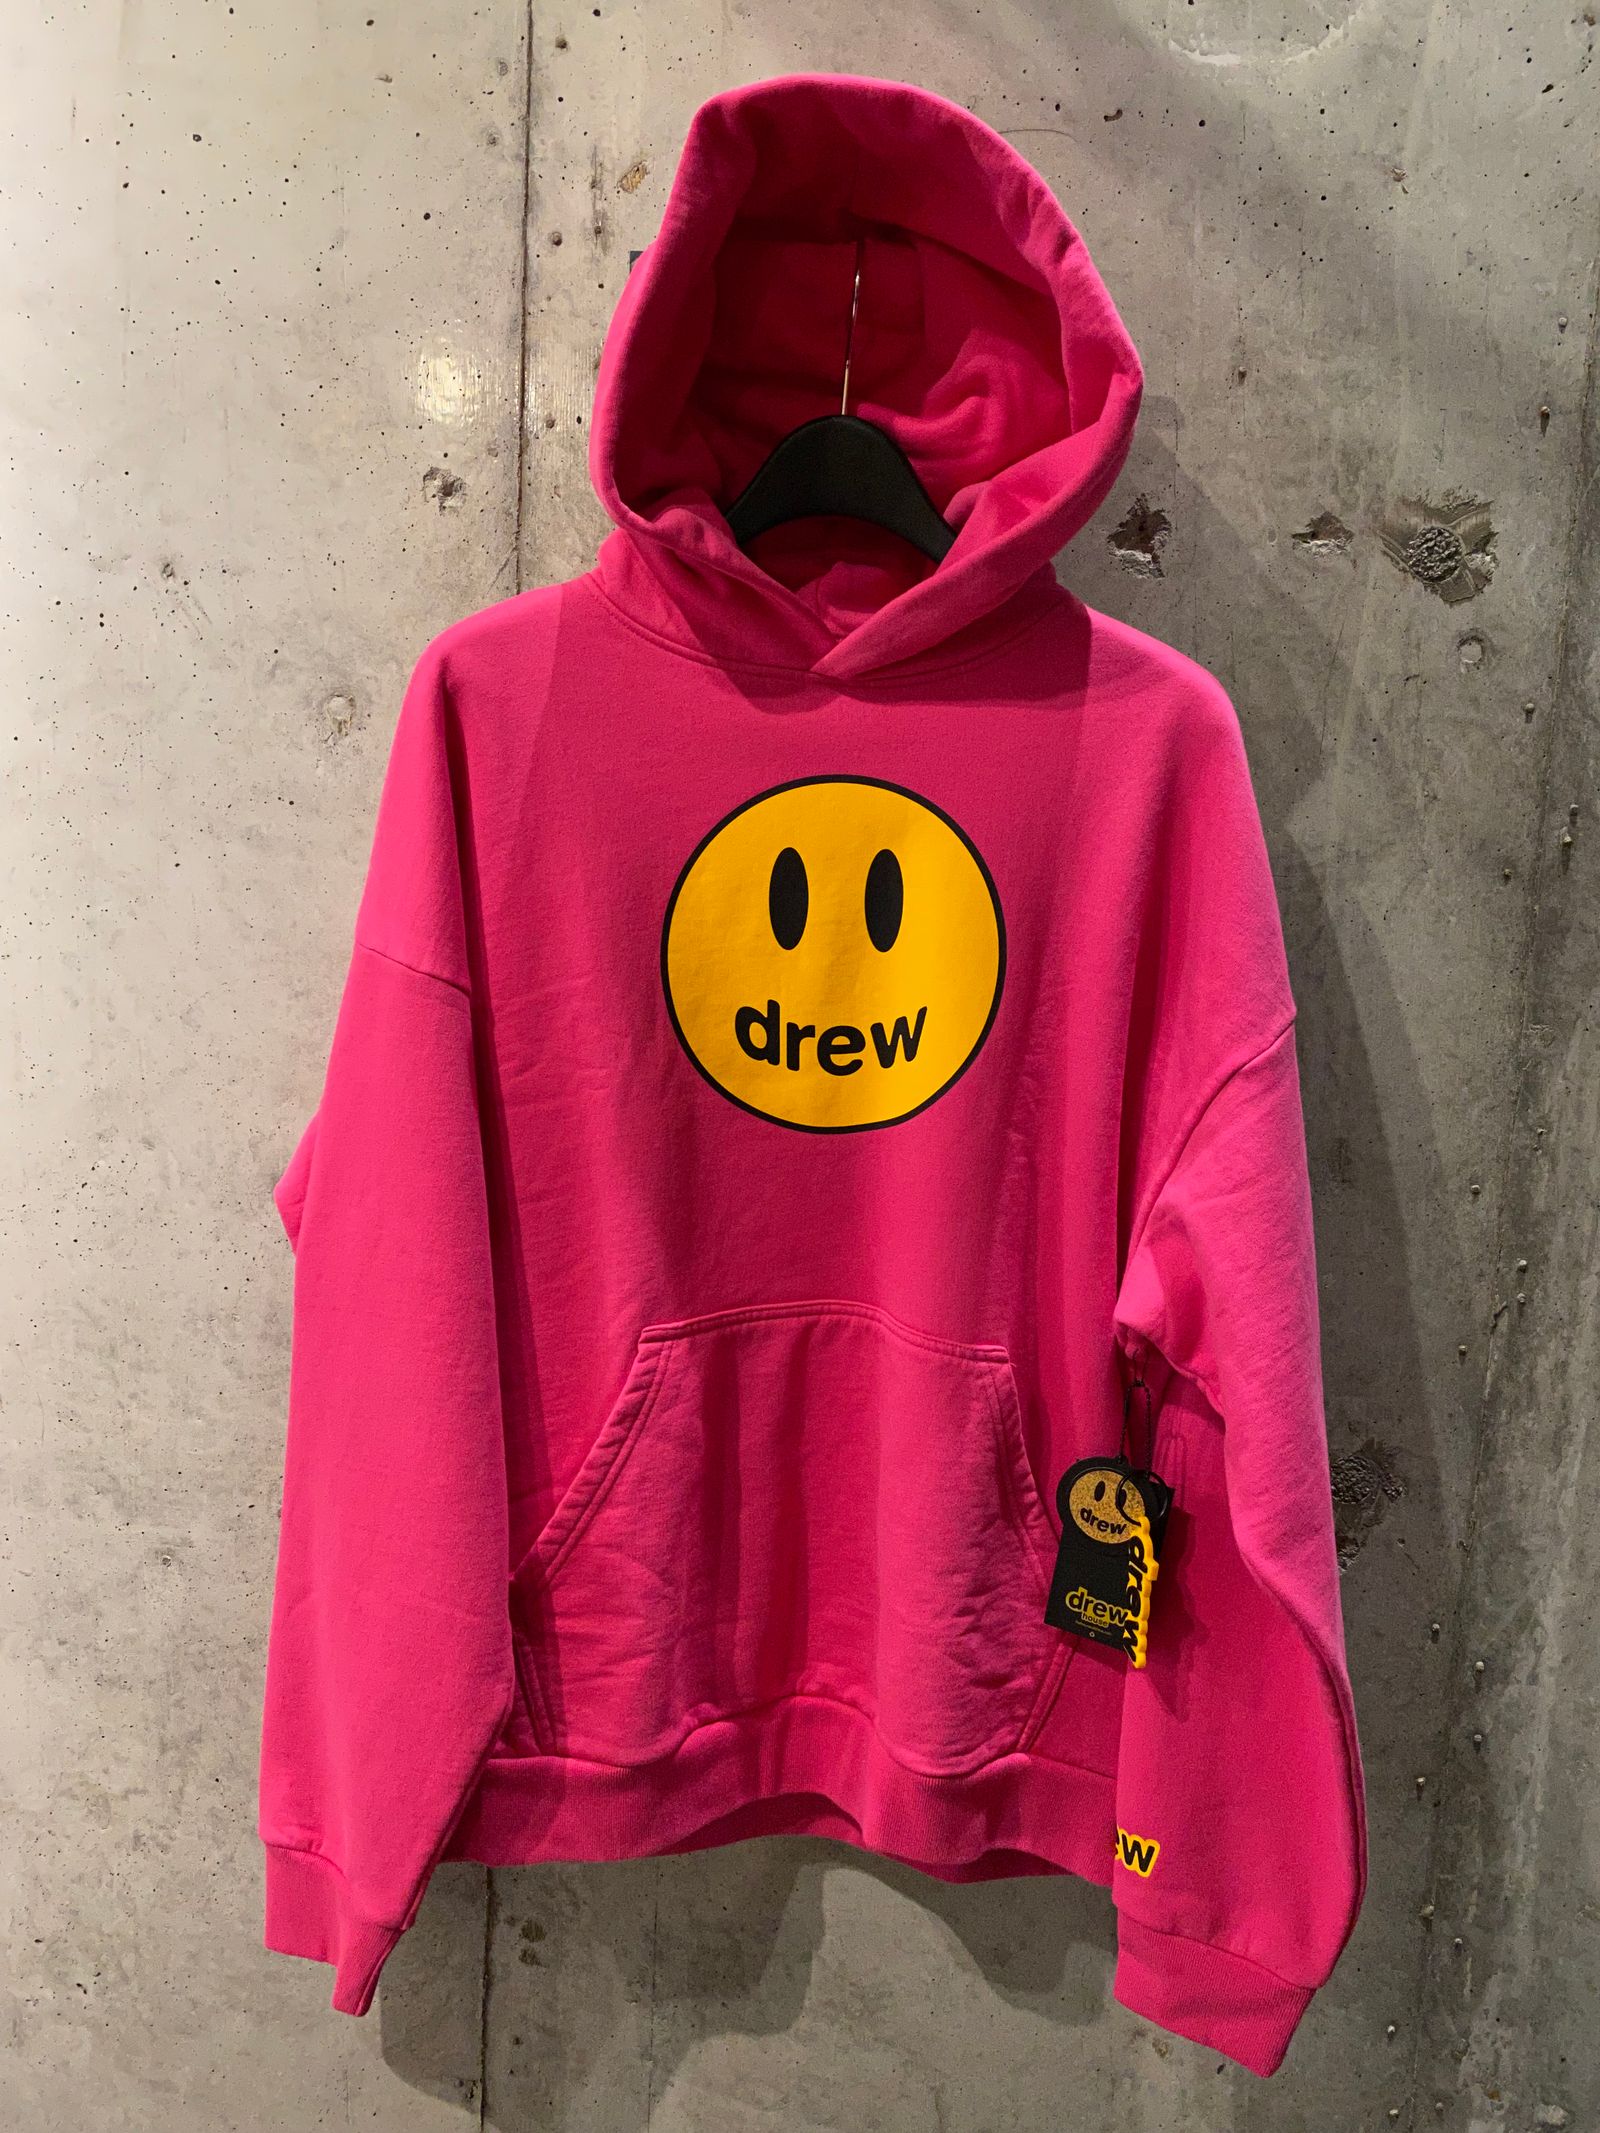 drew house - drew house Mascot Hoodie / Light pink | R and another